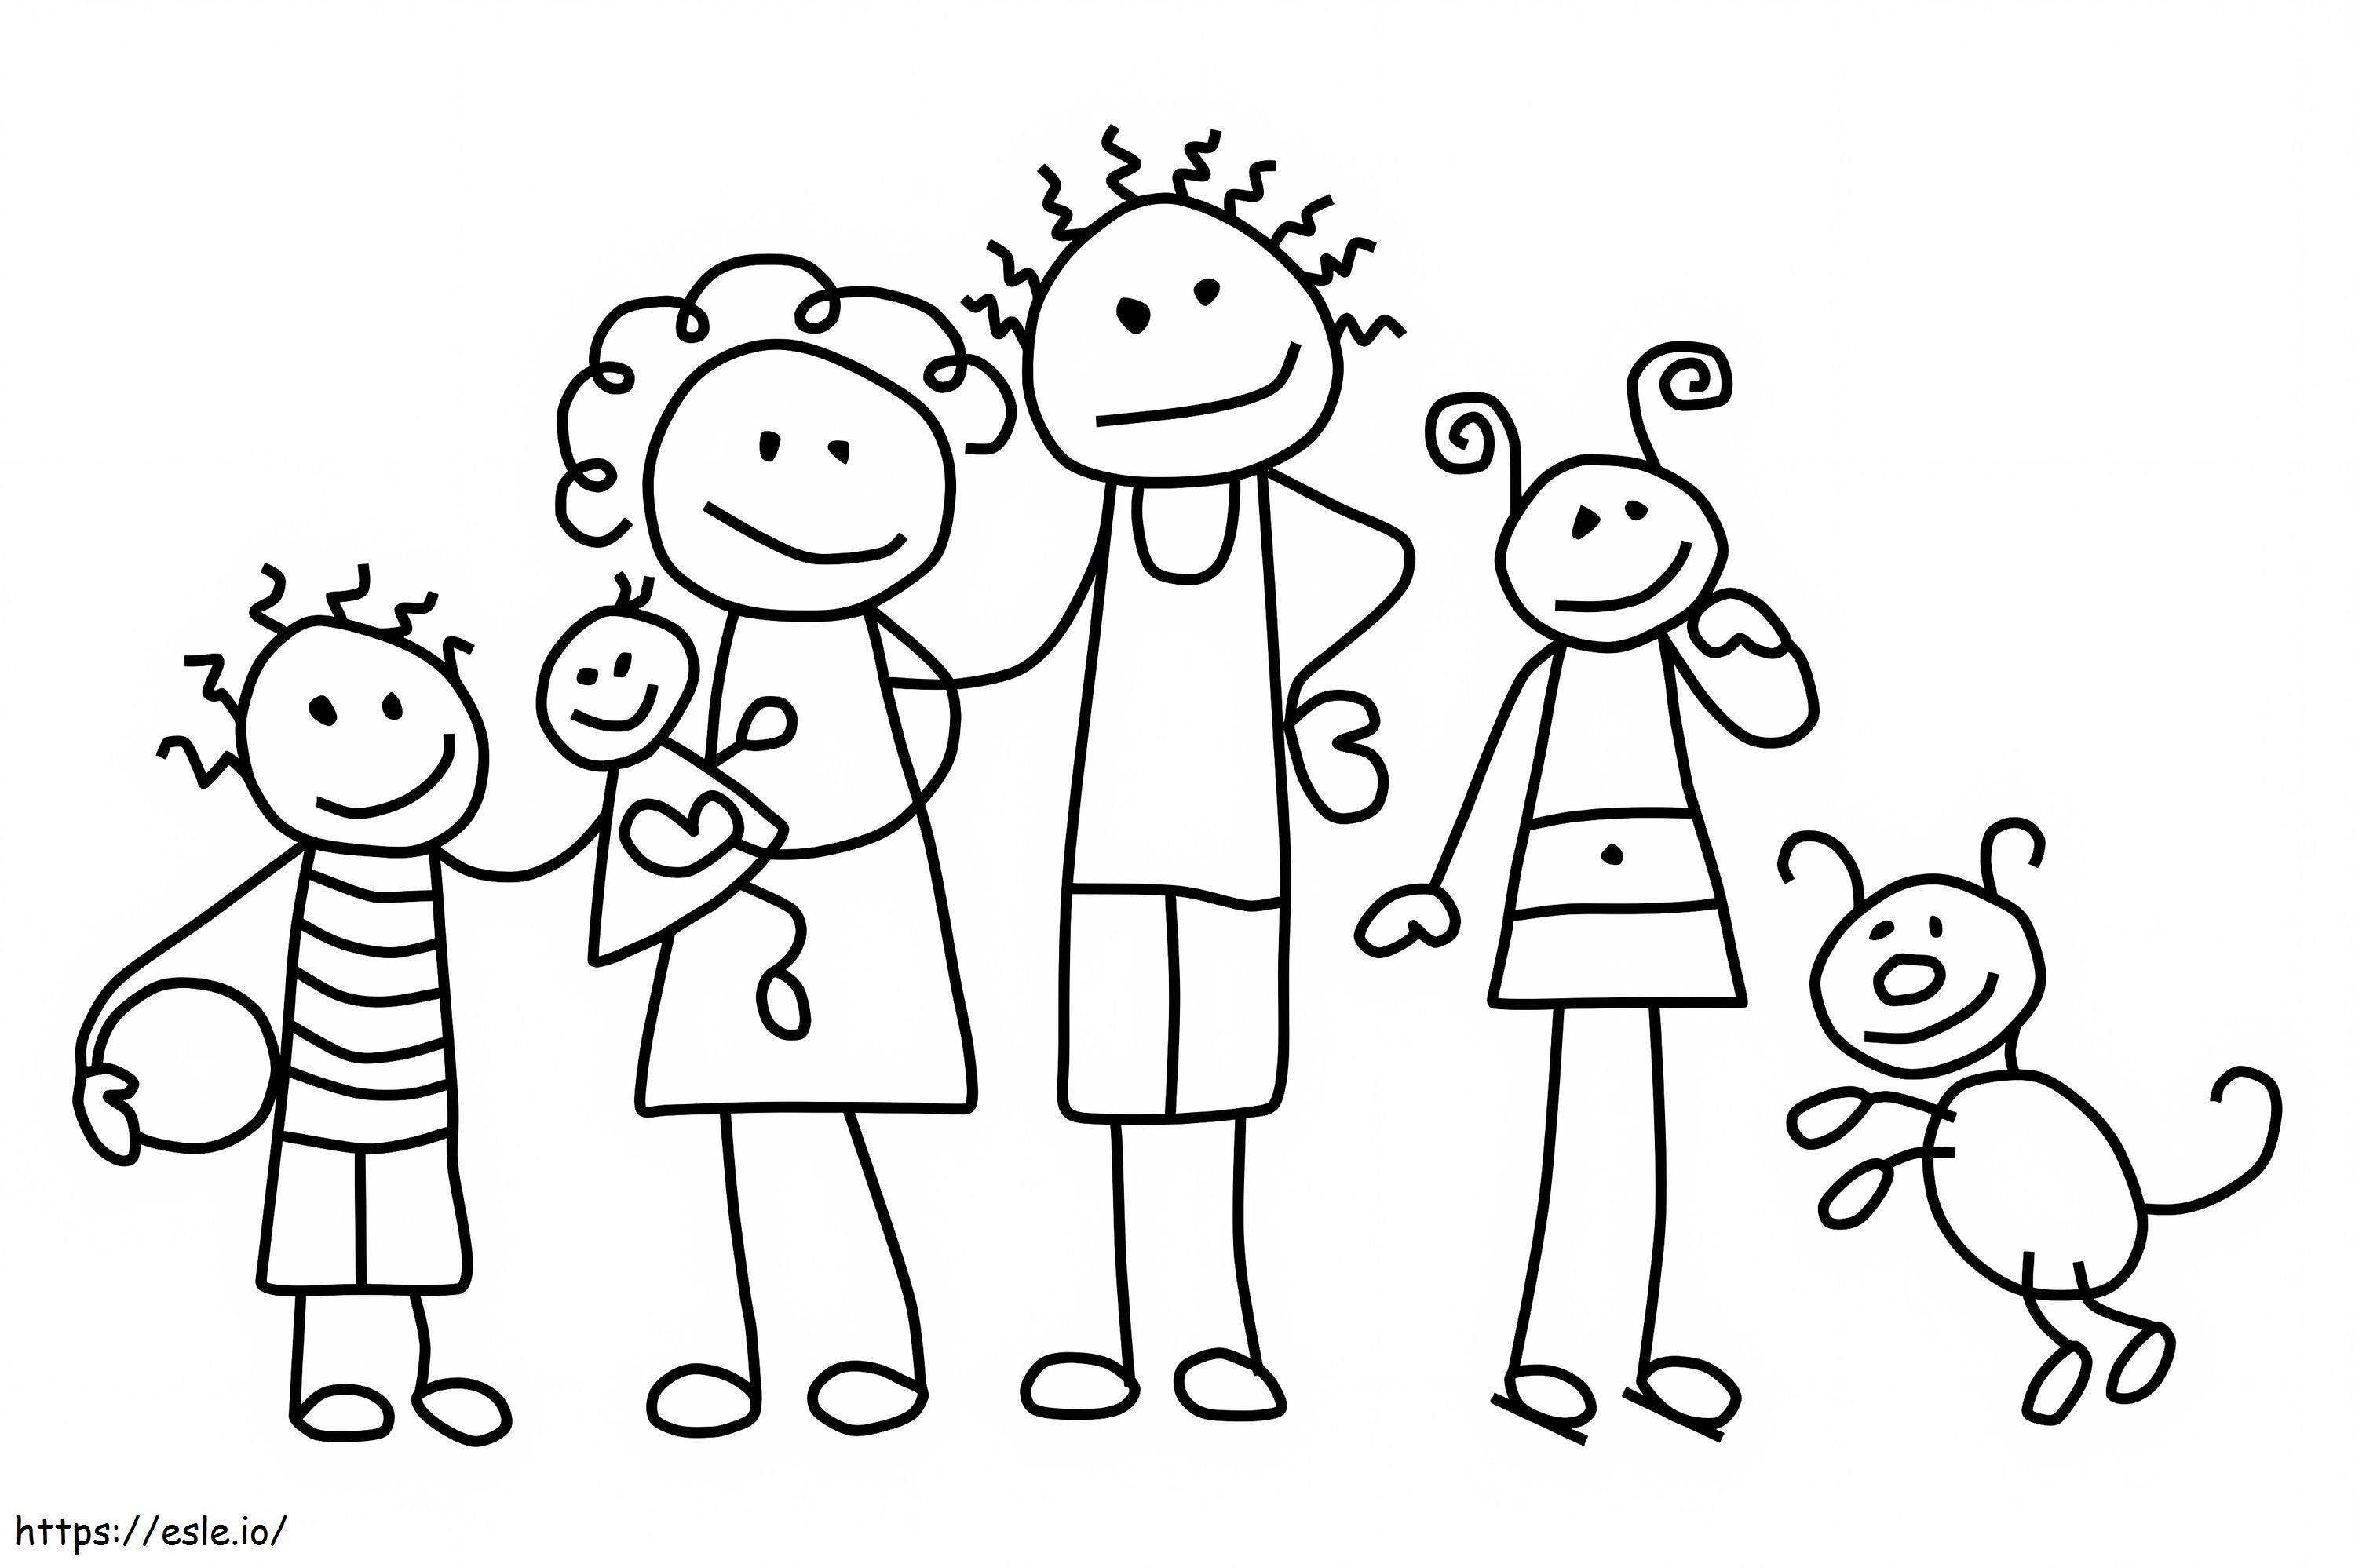 Easy Family coloring page